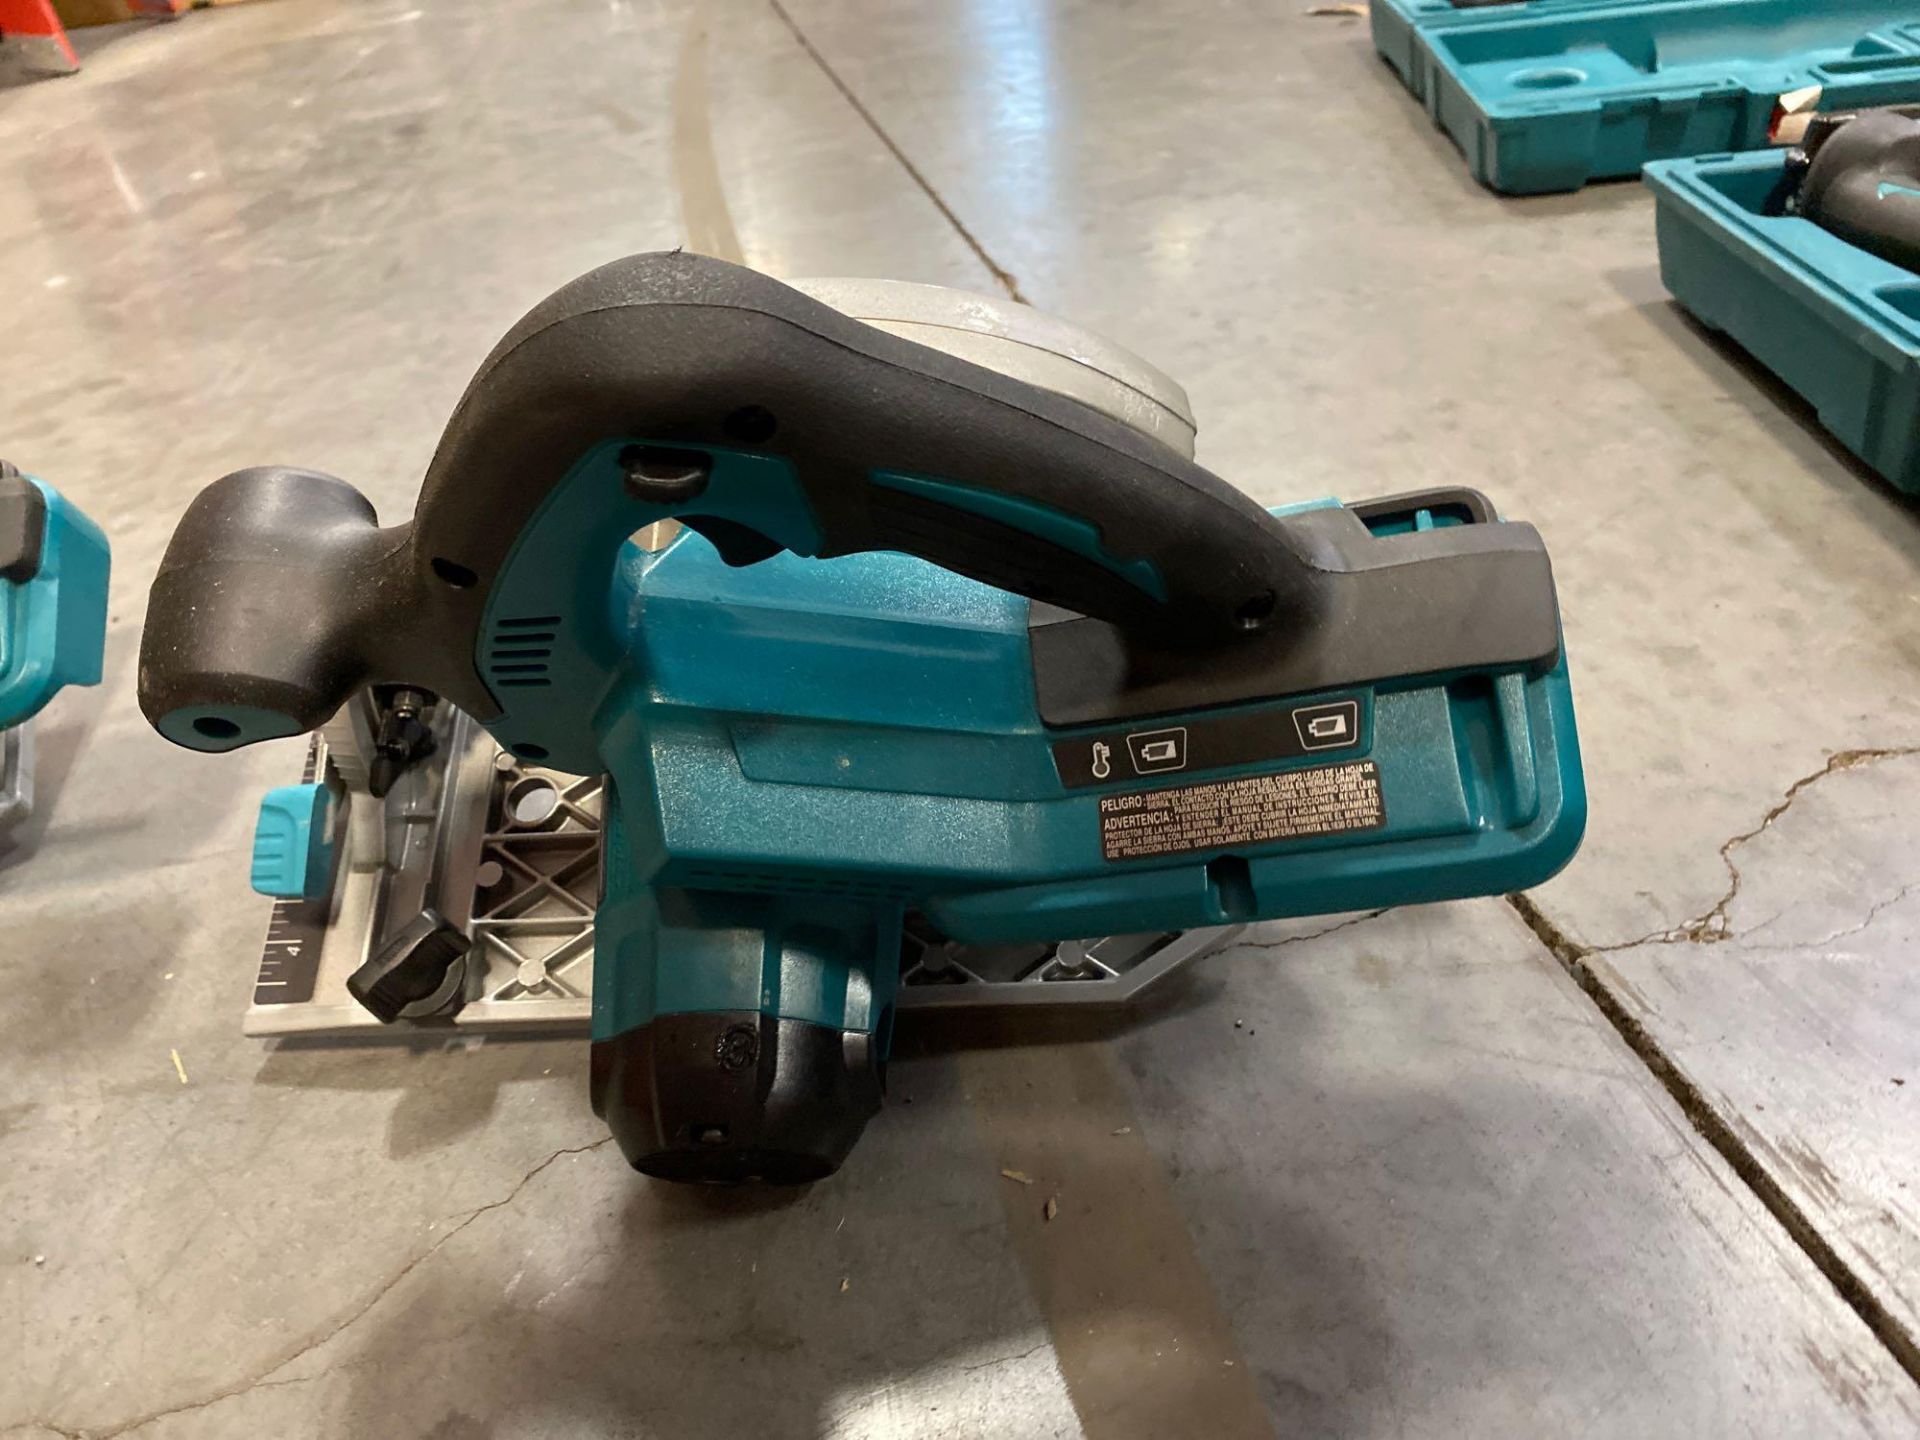 UNUSED RECONDITIONED MAKITA 36V SAW - Image 3 of 3